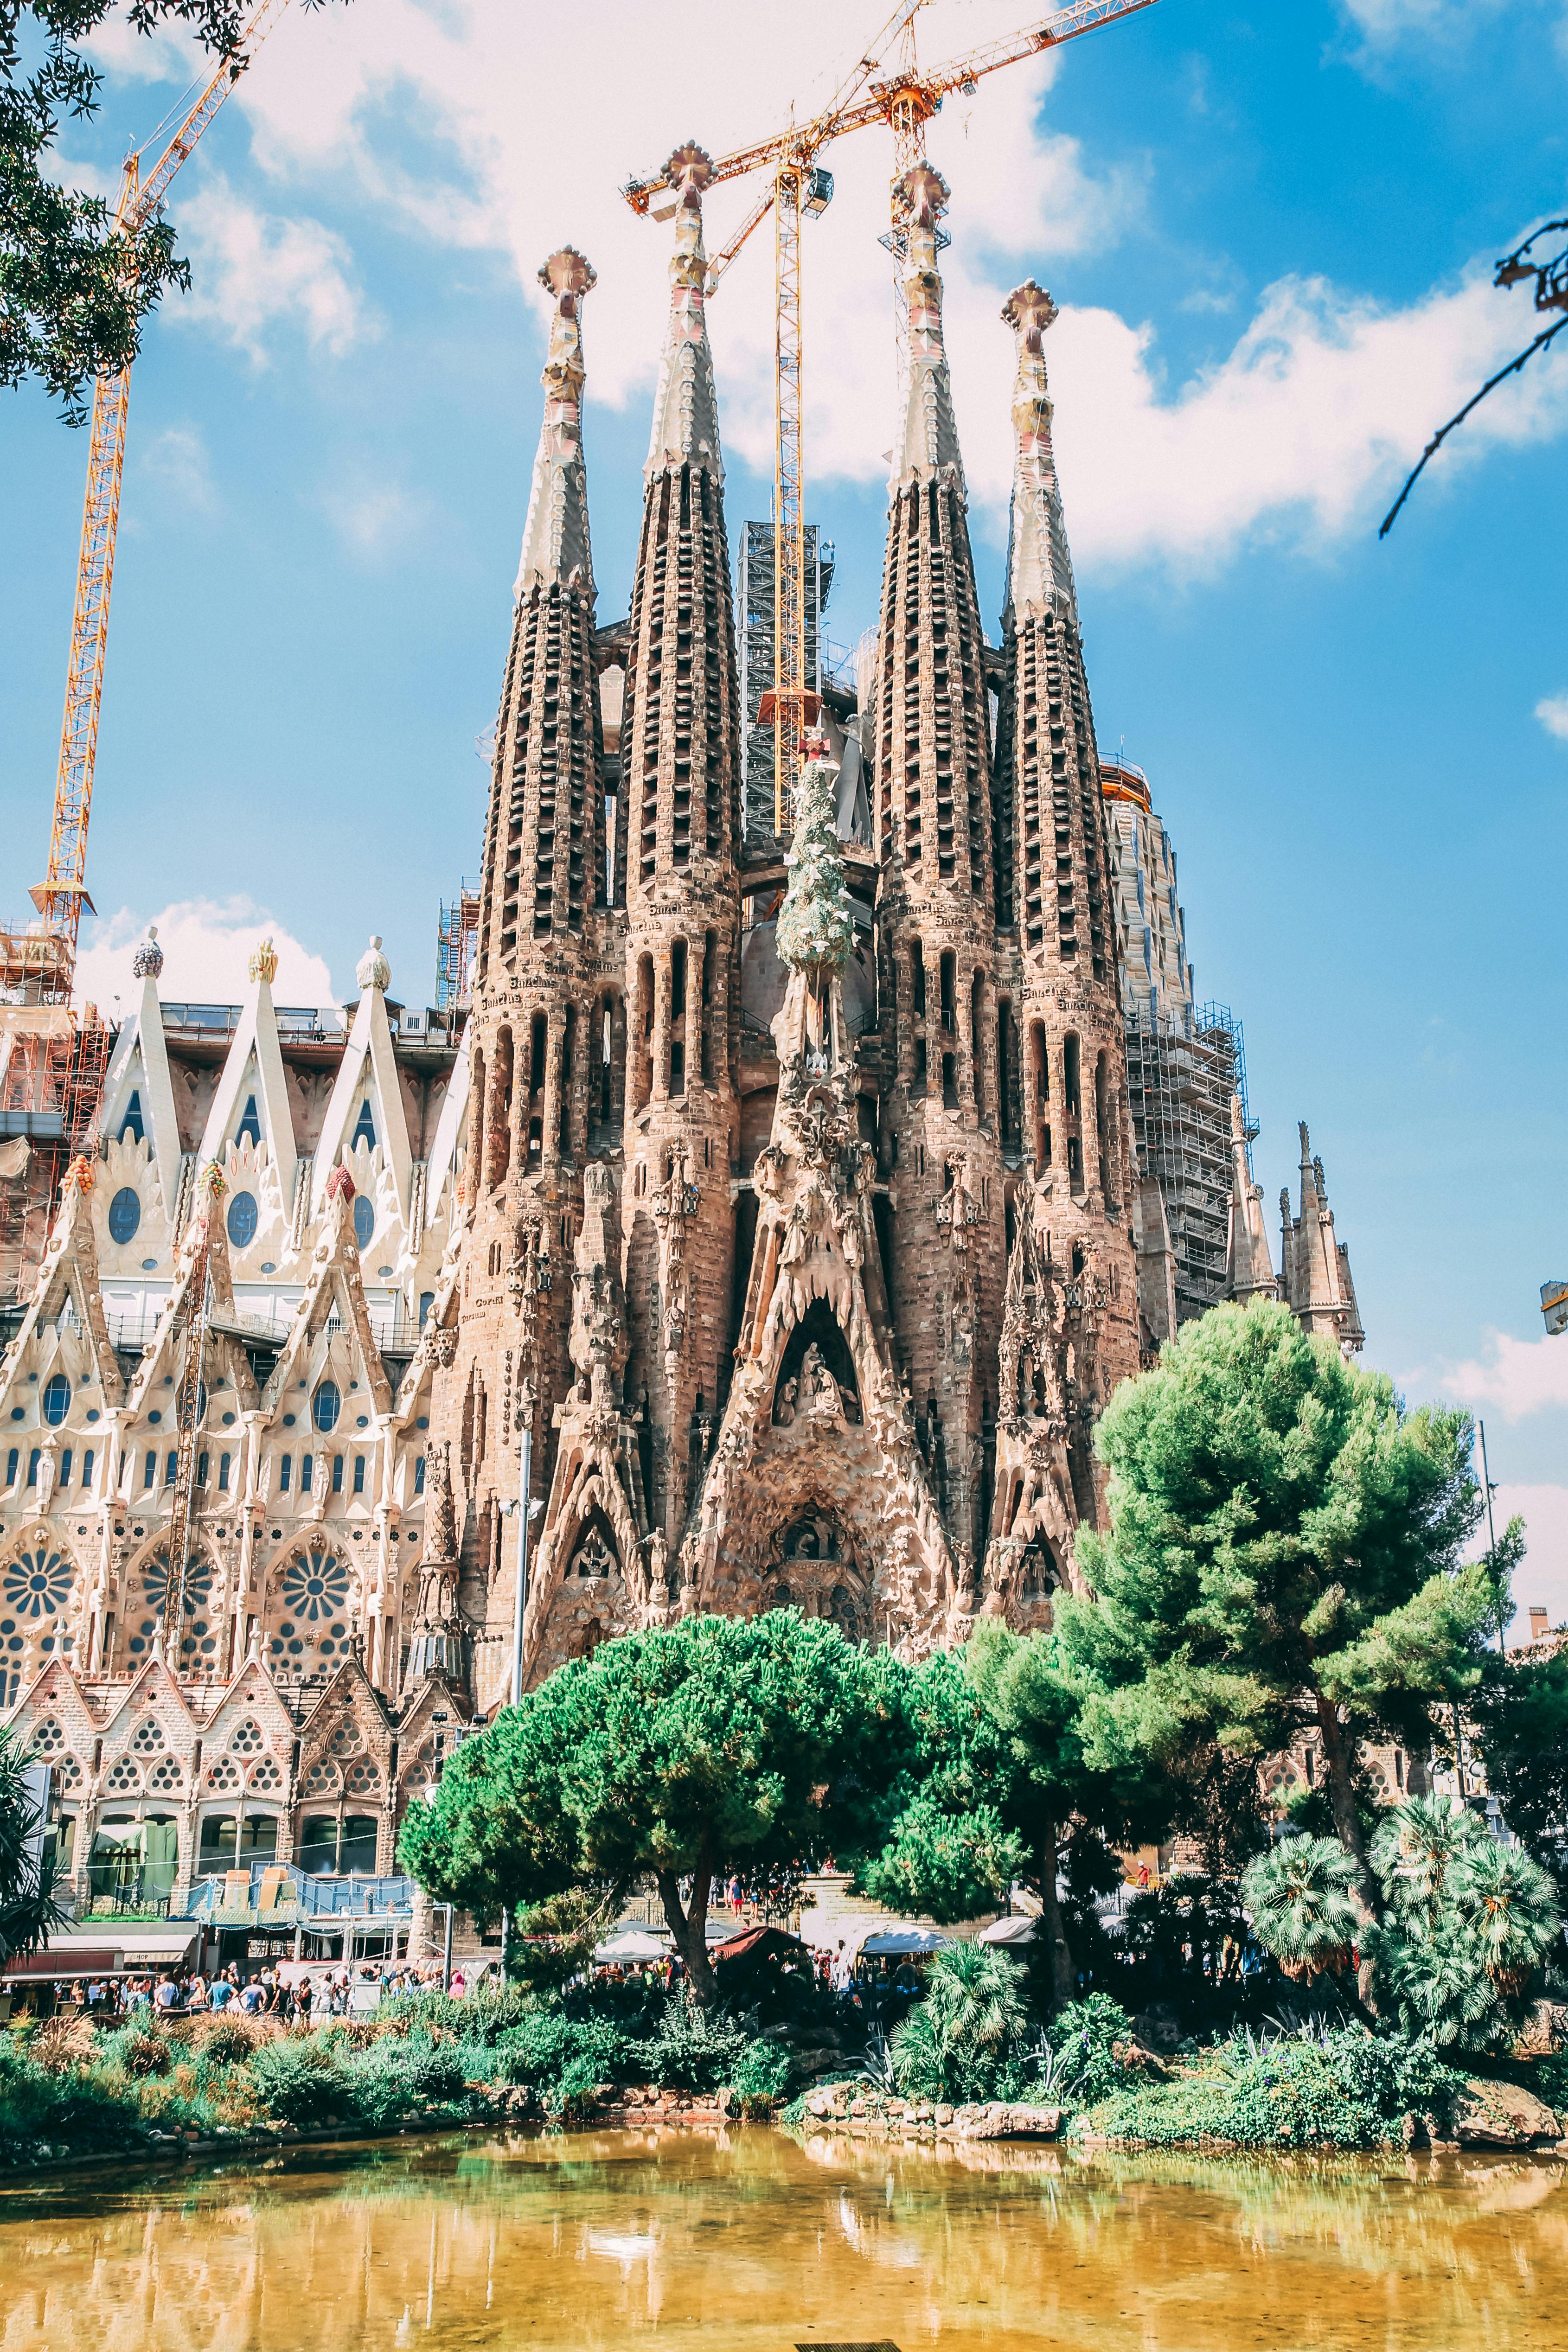 Barcelona Photos, Download The BEST Free Barcelona Stock Photos & HD Images